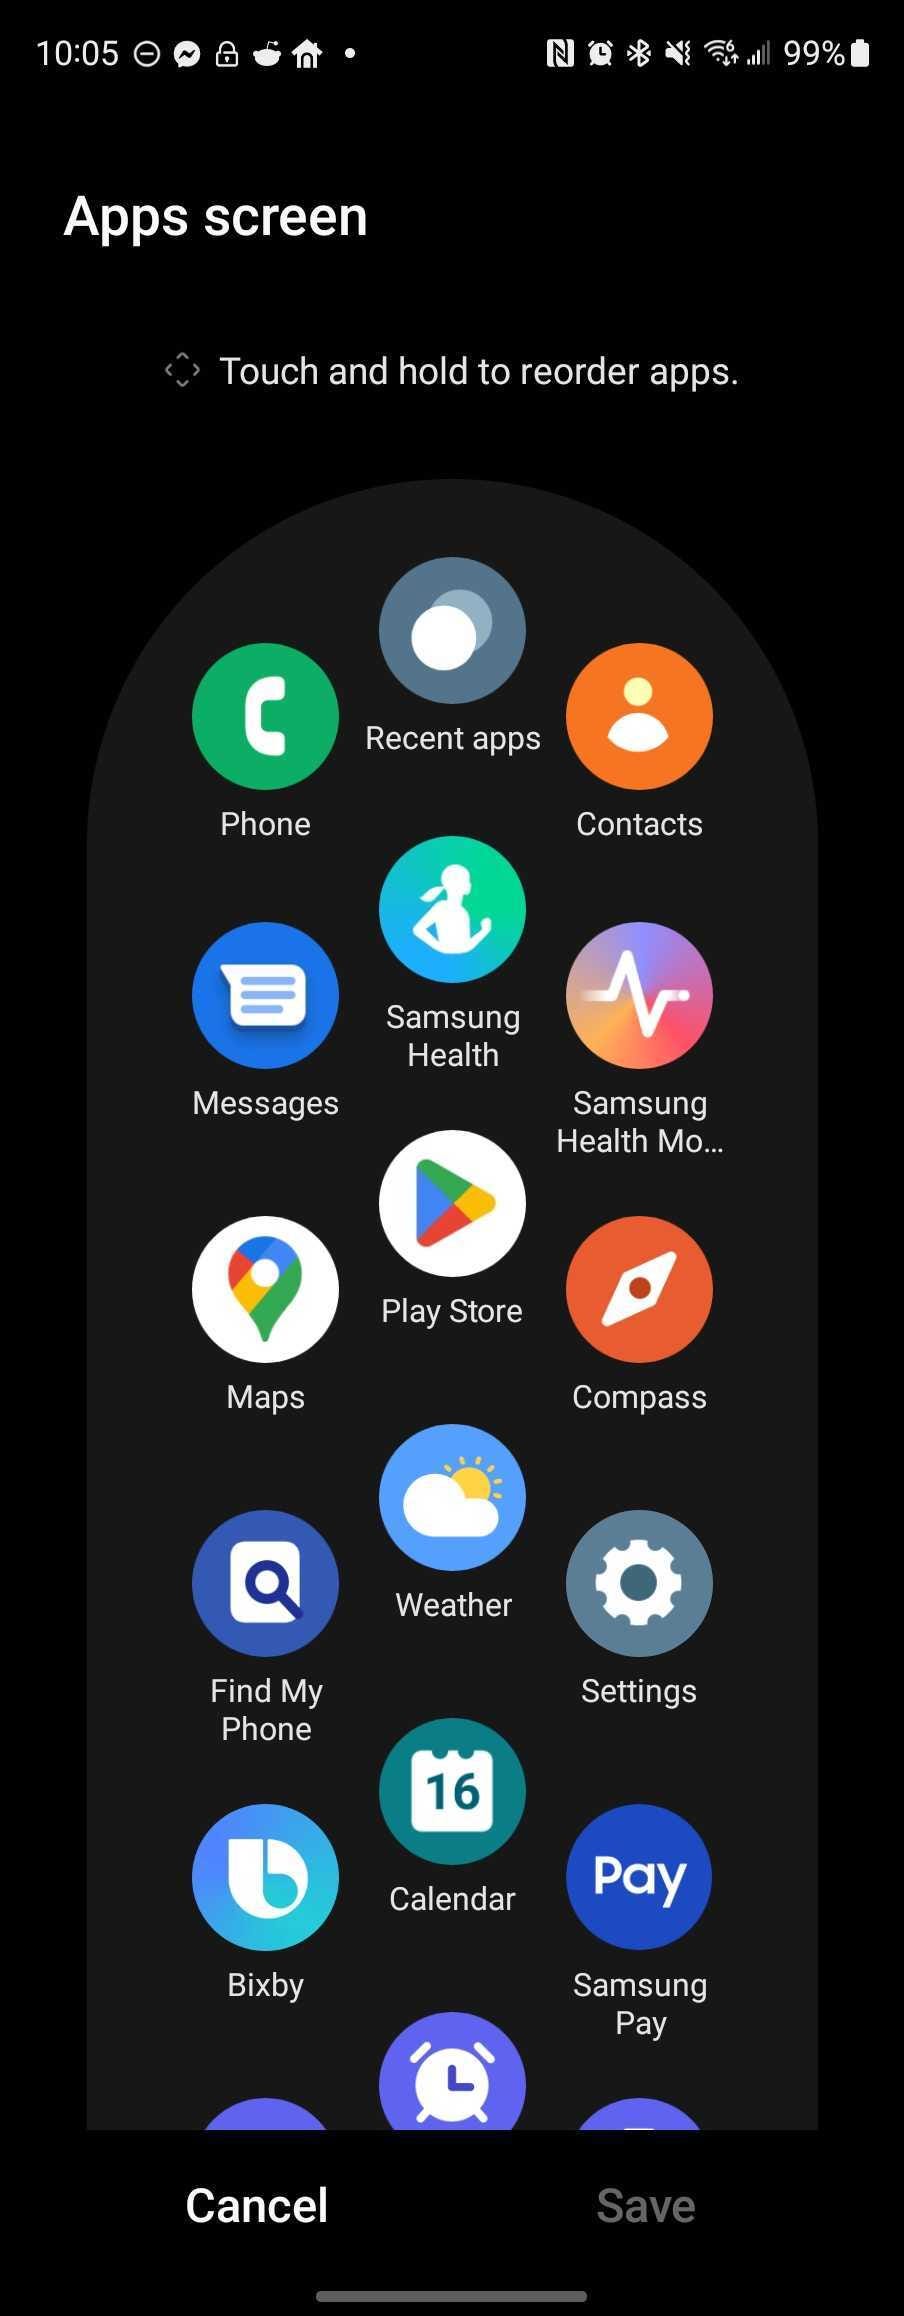 The Galaxy Watch app screen for reorganizing apps